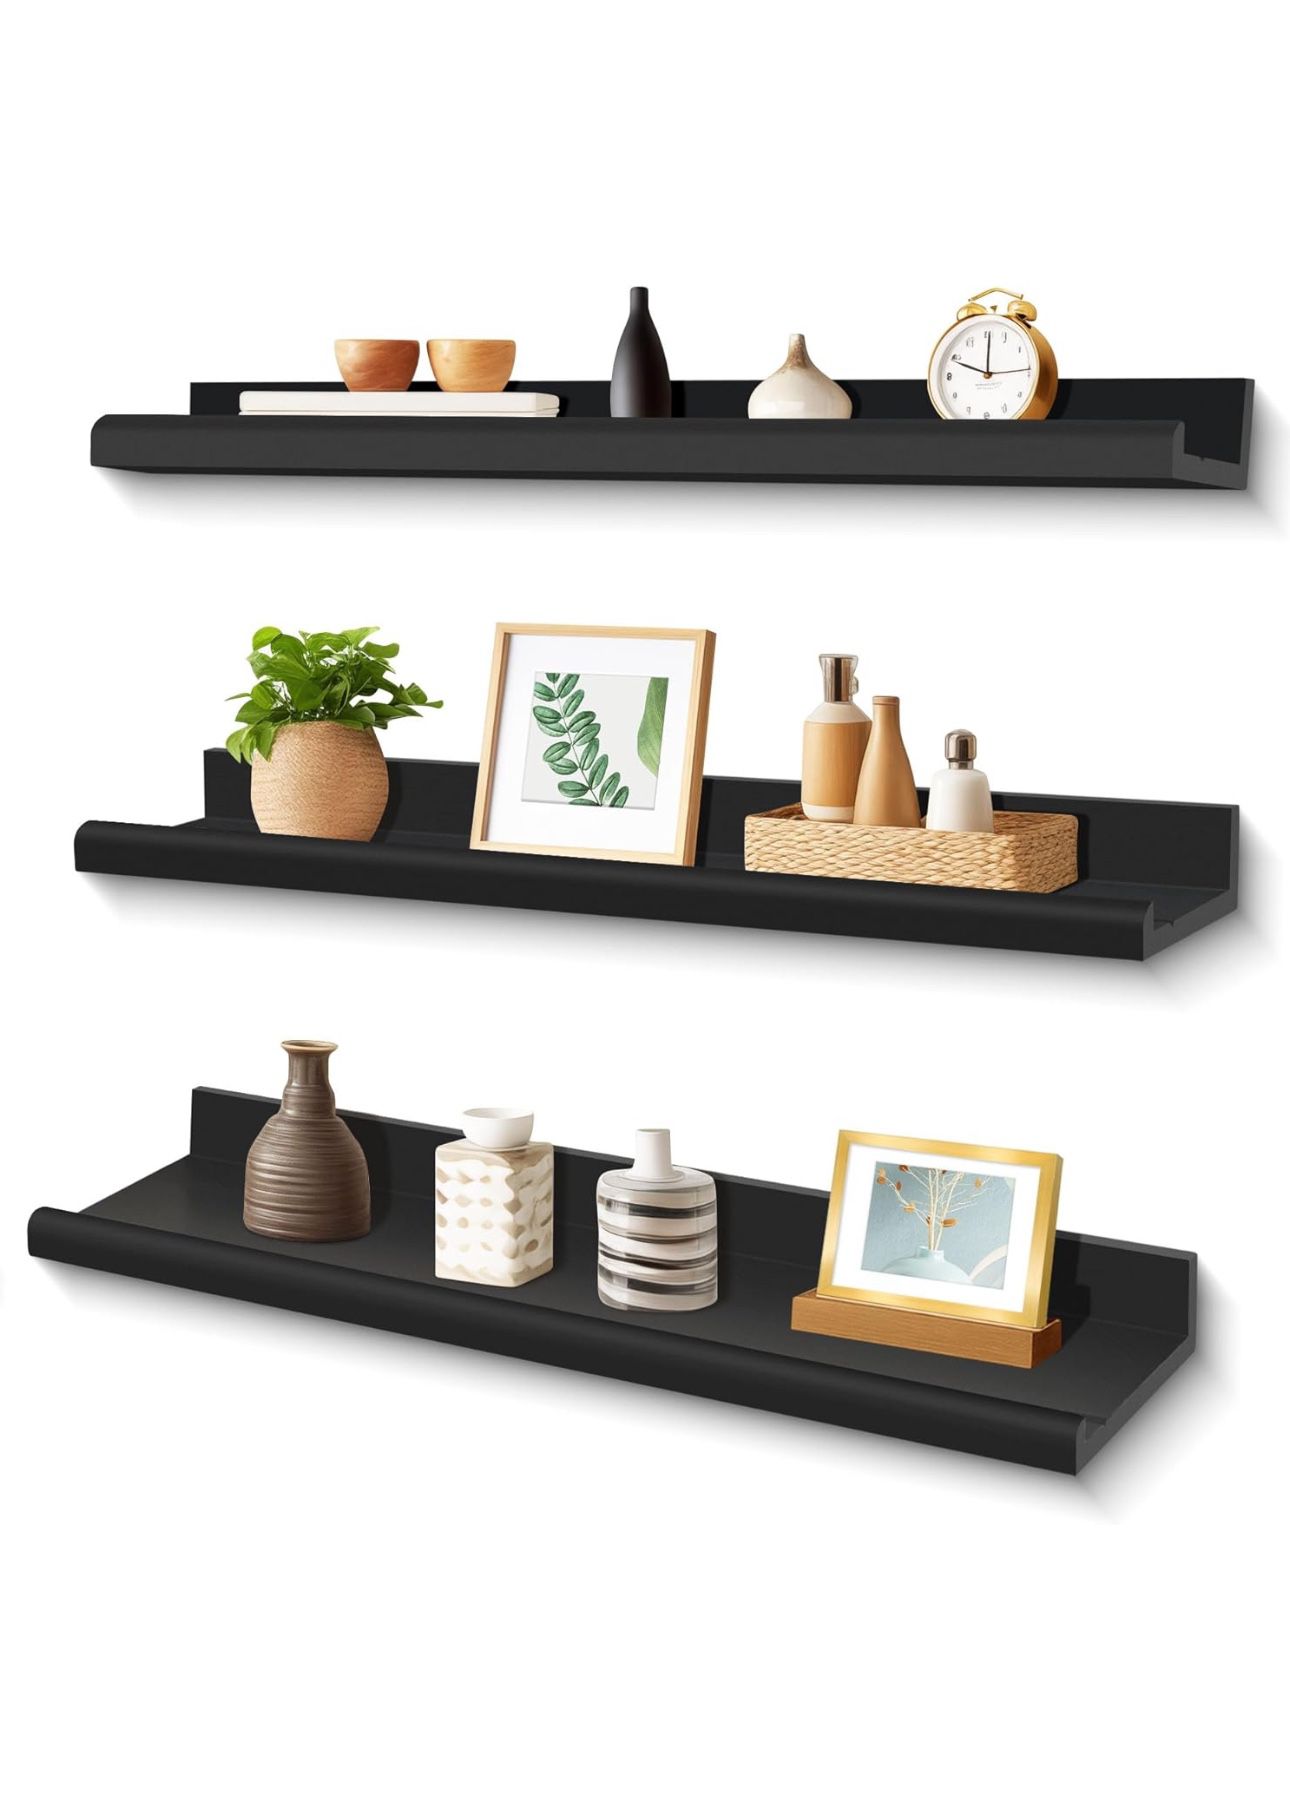 Annecy Floating Shelves Wall Mounted Set of 3, 23.6 Inch Black Rustic Wood Shelves for Wall, Wall Storage Shelves with Guardrail Design for Bedroom, B